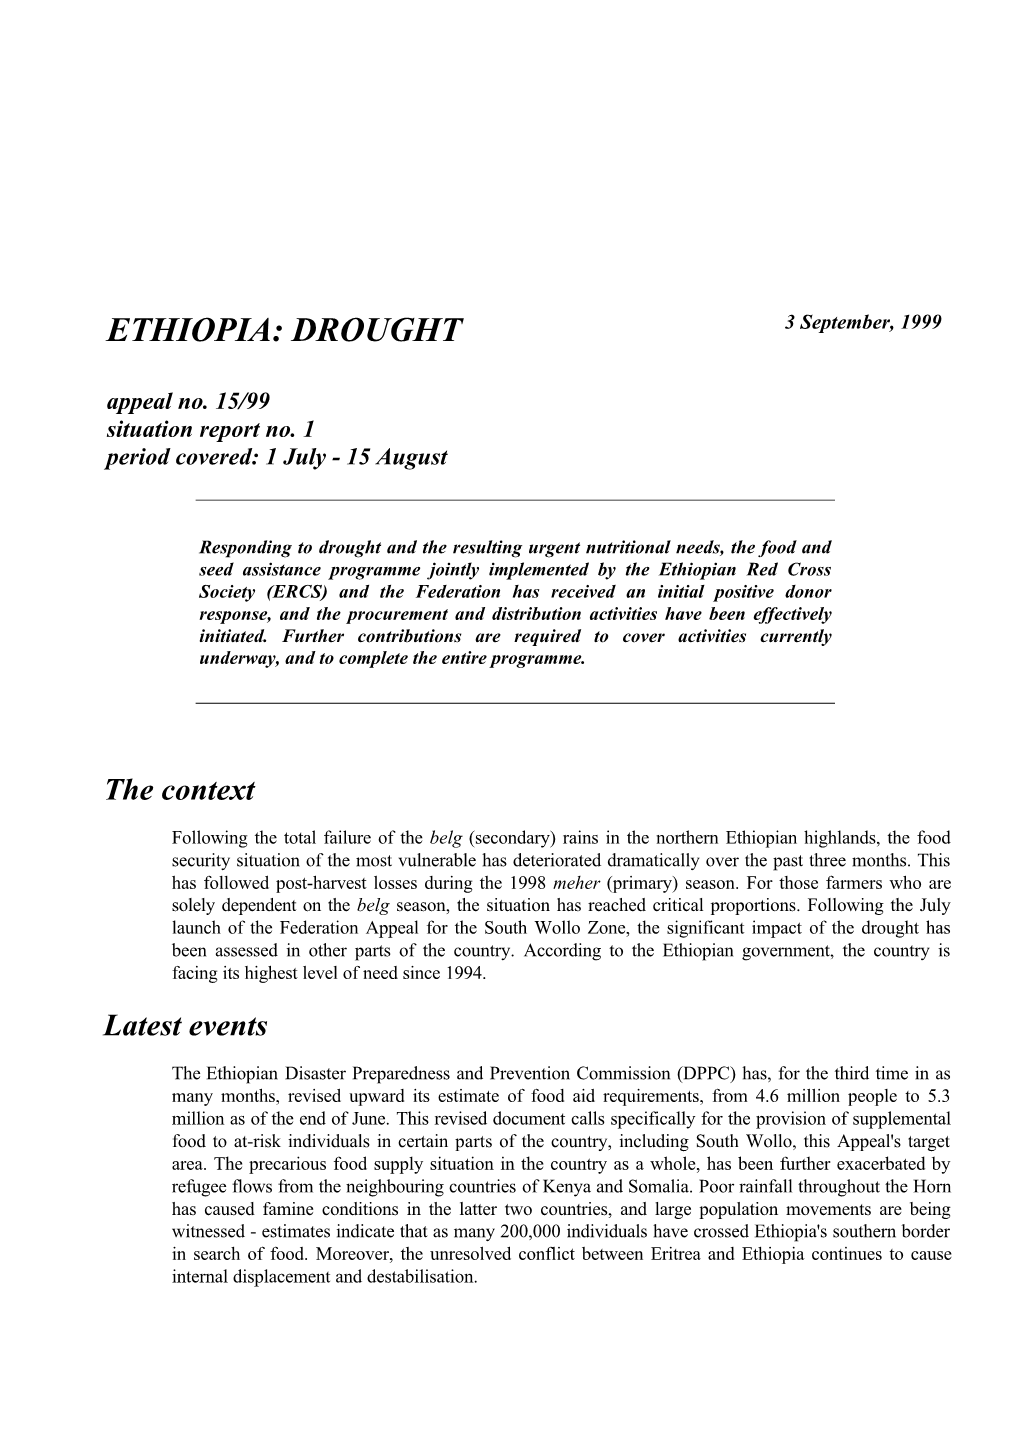 ETHIOPIA DROUGHT (Appeal 15/99)